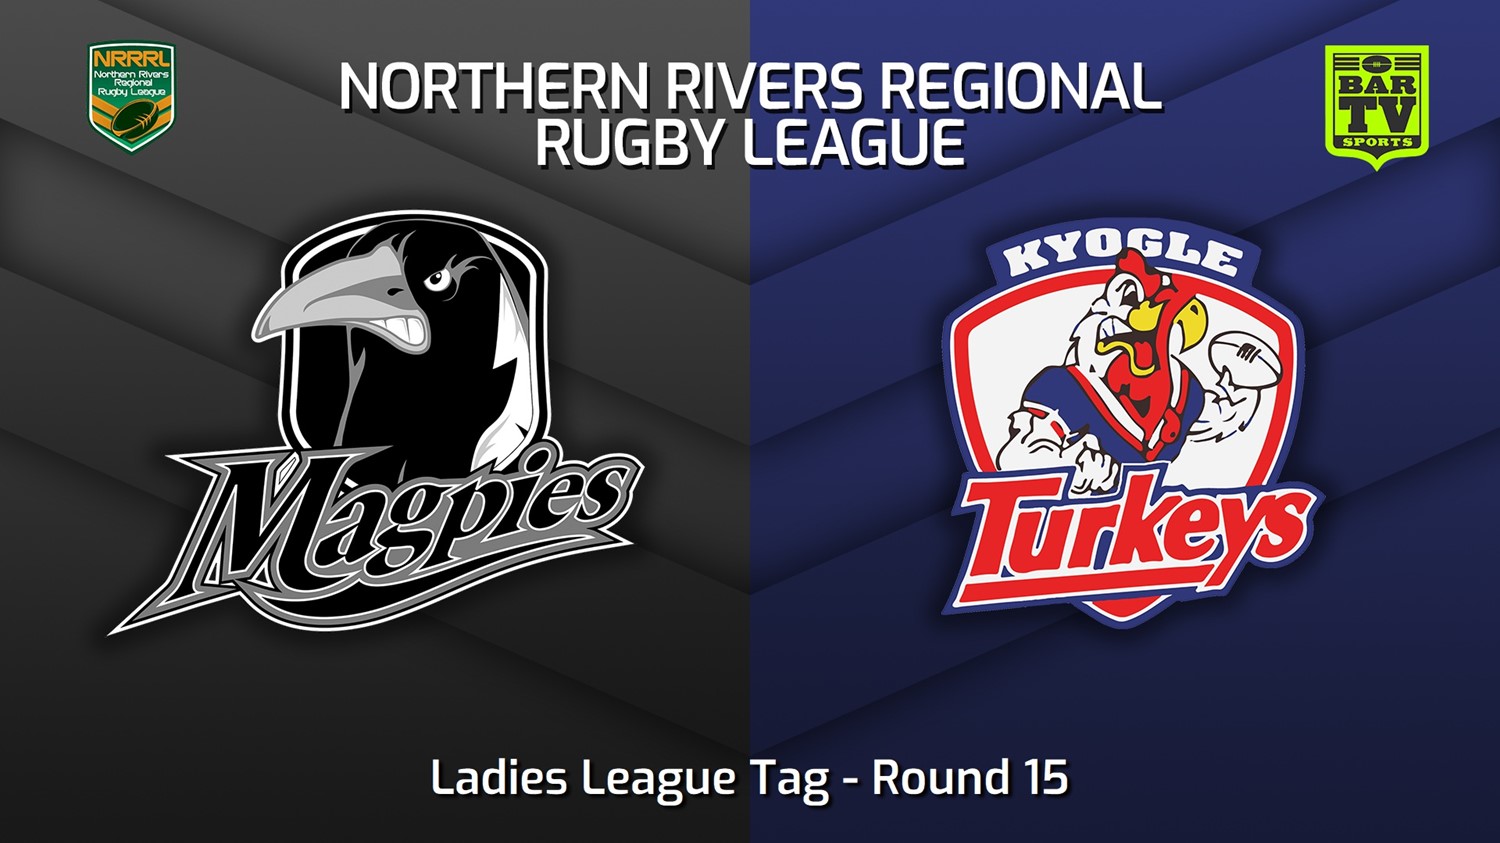 230805-Northern Rivers Round 15 - Ladies League Tag - Lower Clarence Magpies v Kyogle Turkeys Slate Image